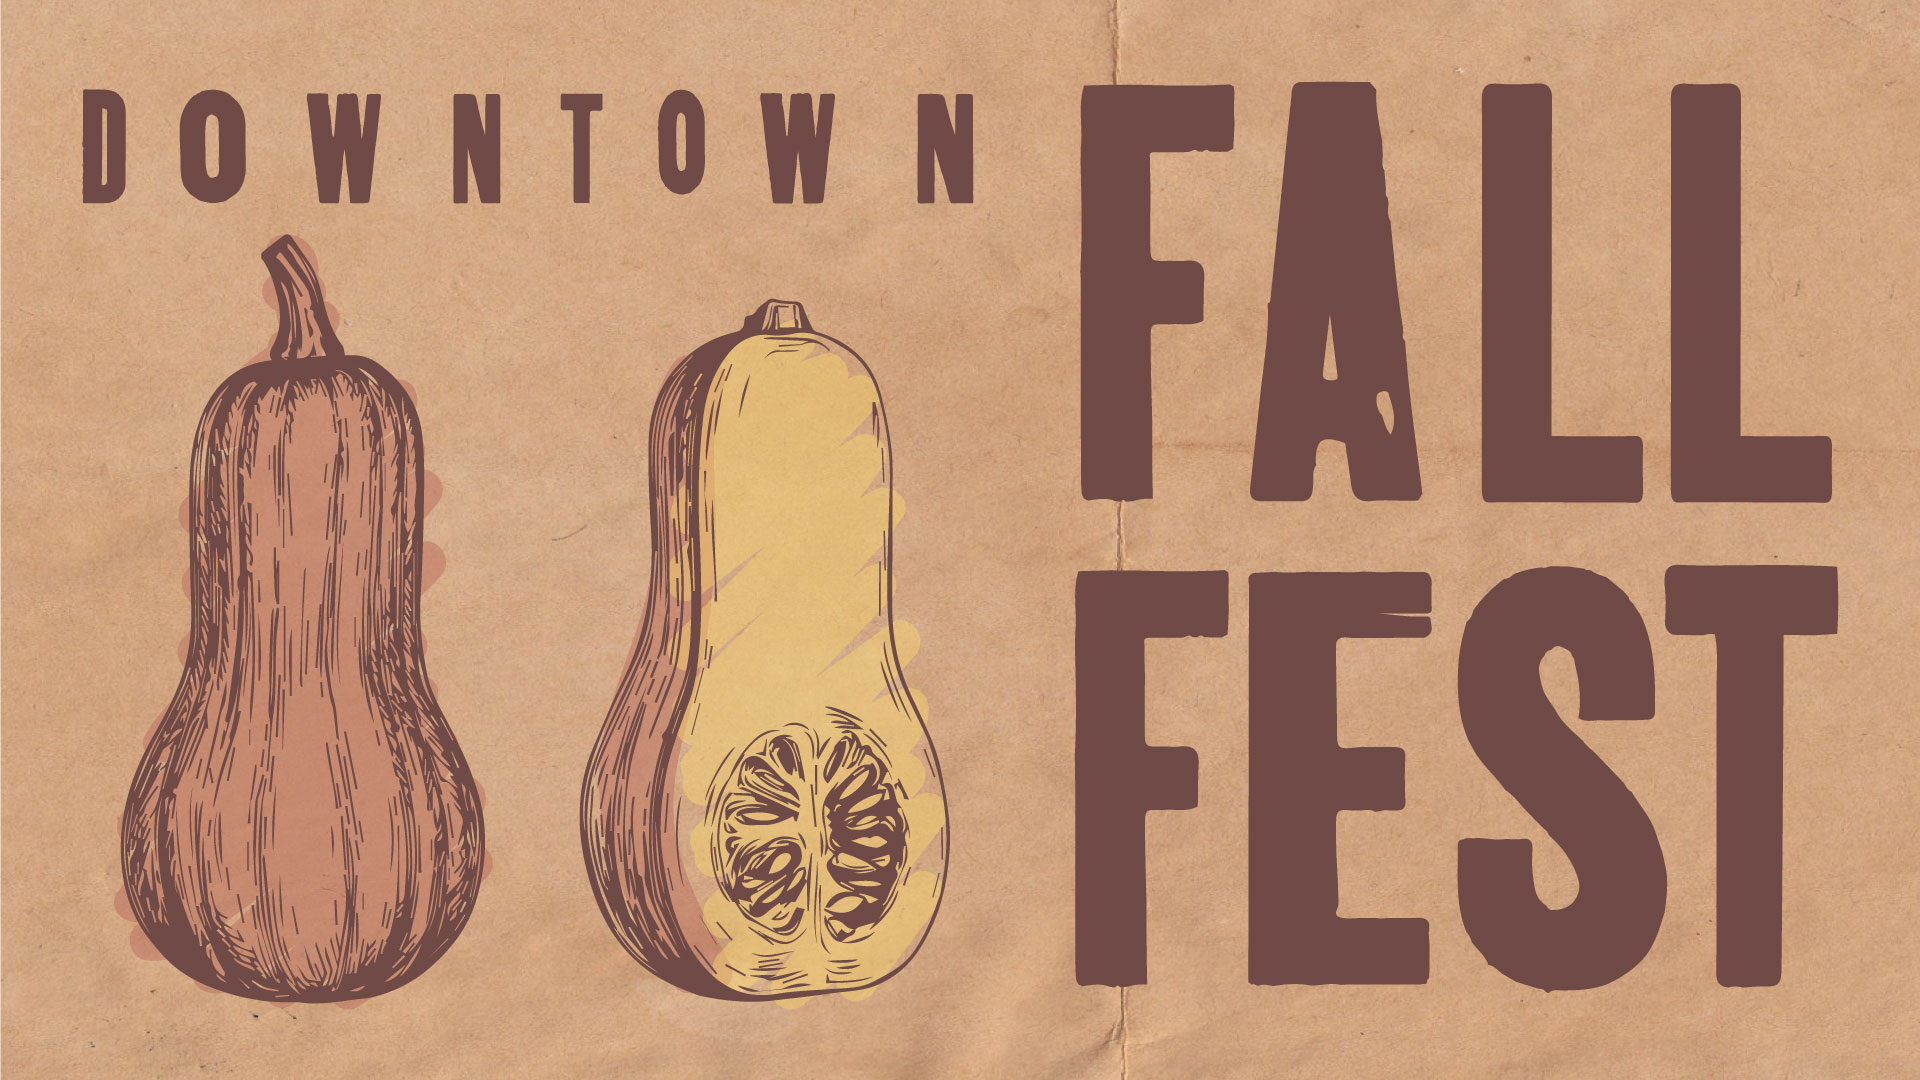 Downtown Fall Fest